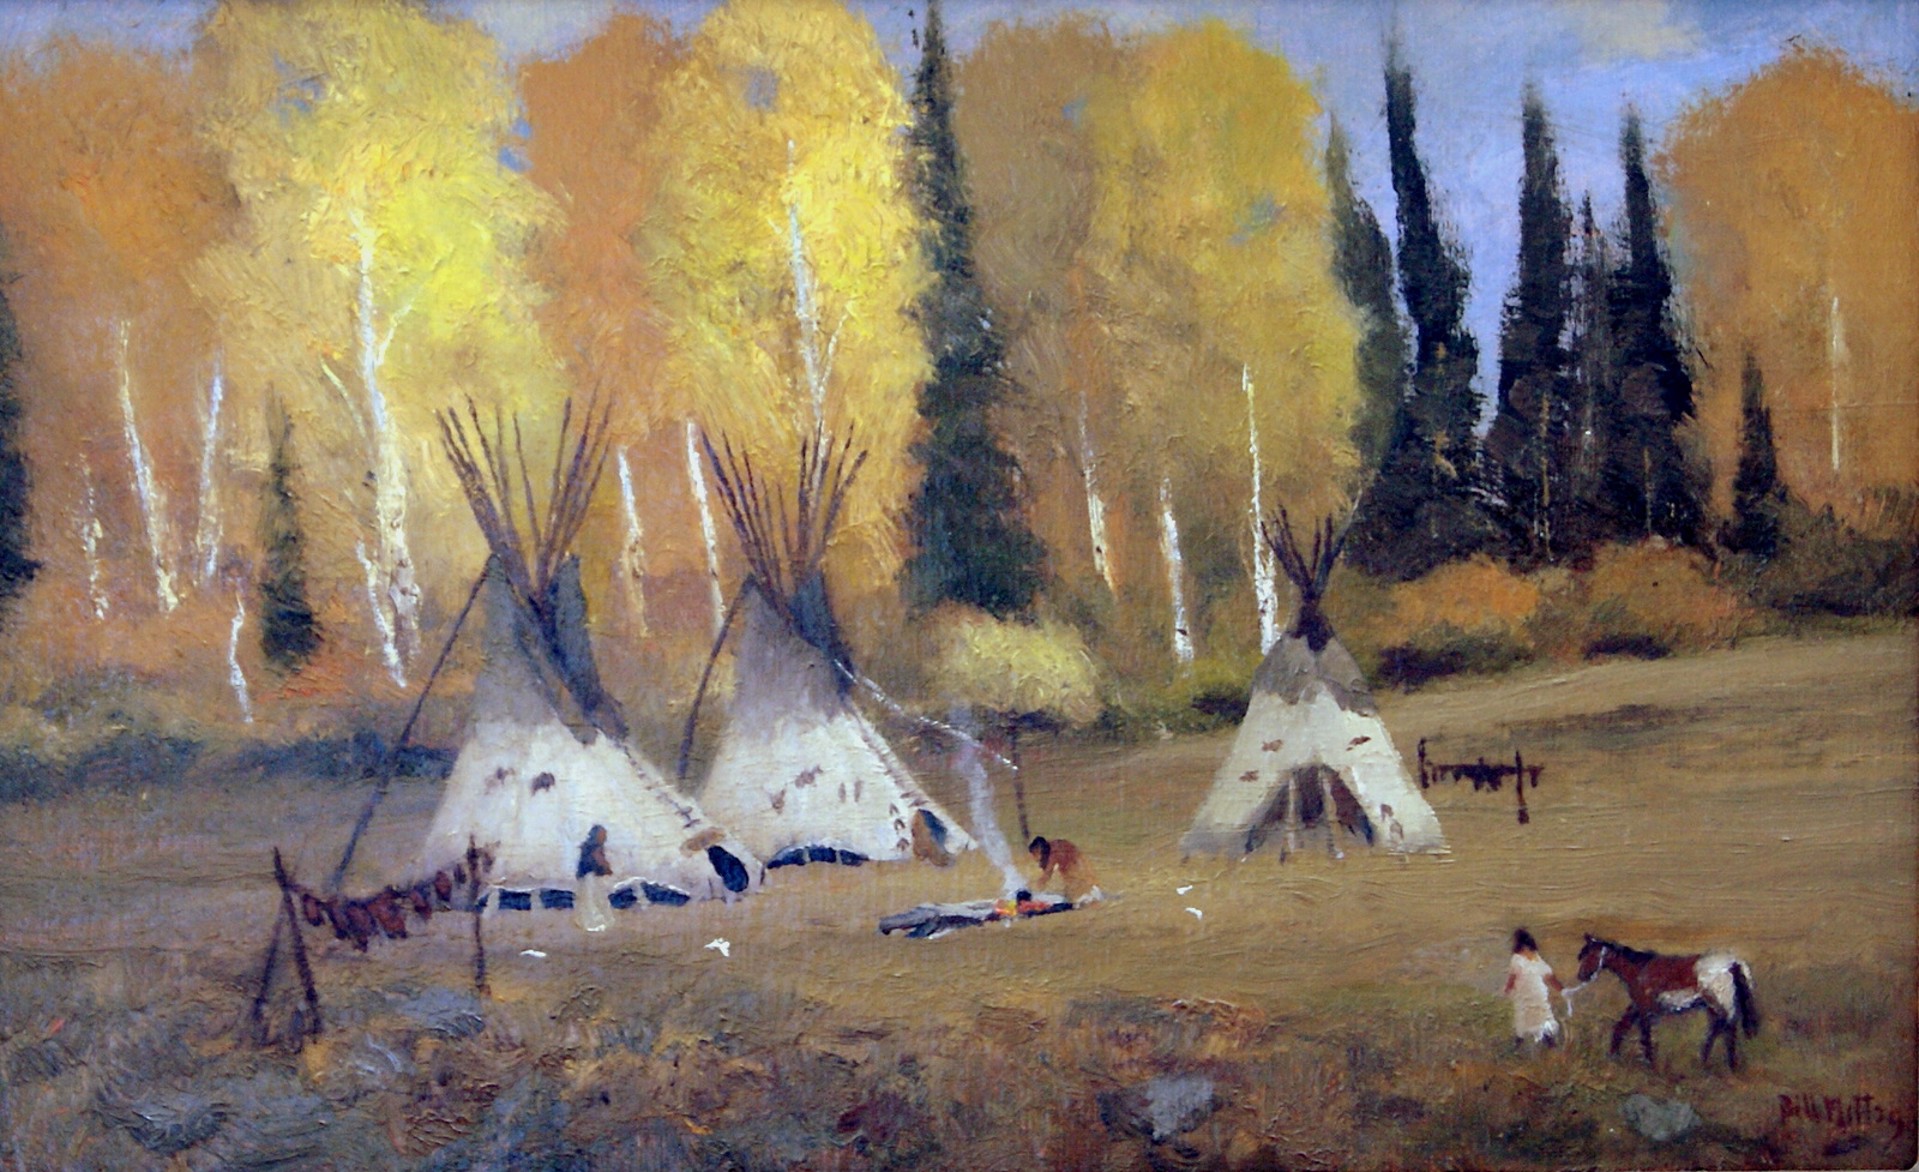 Song of the Aspens by Bill Mittag